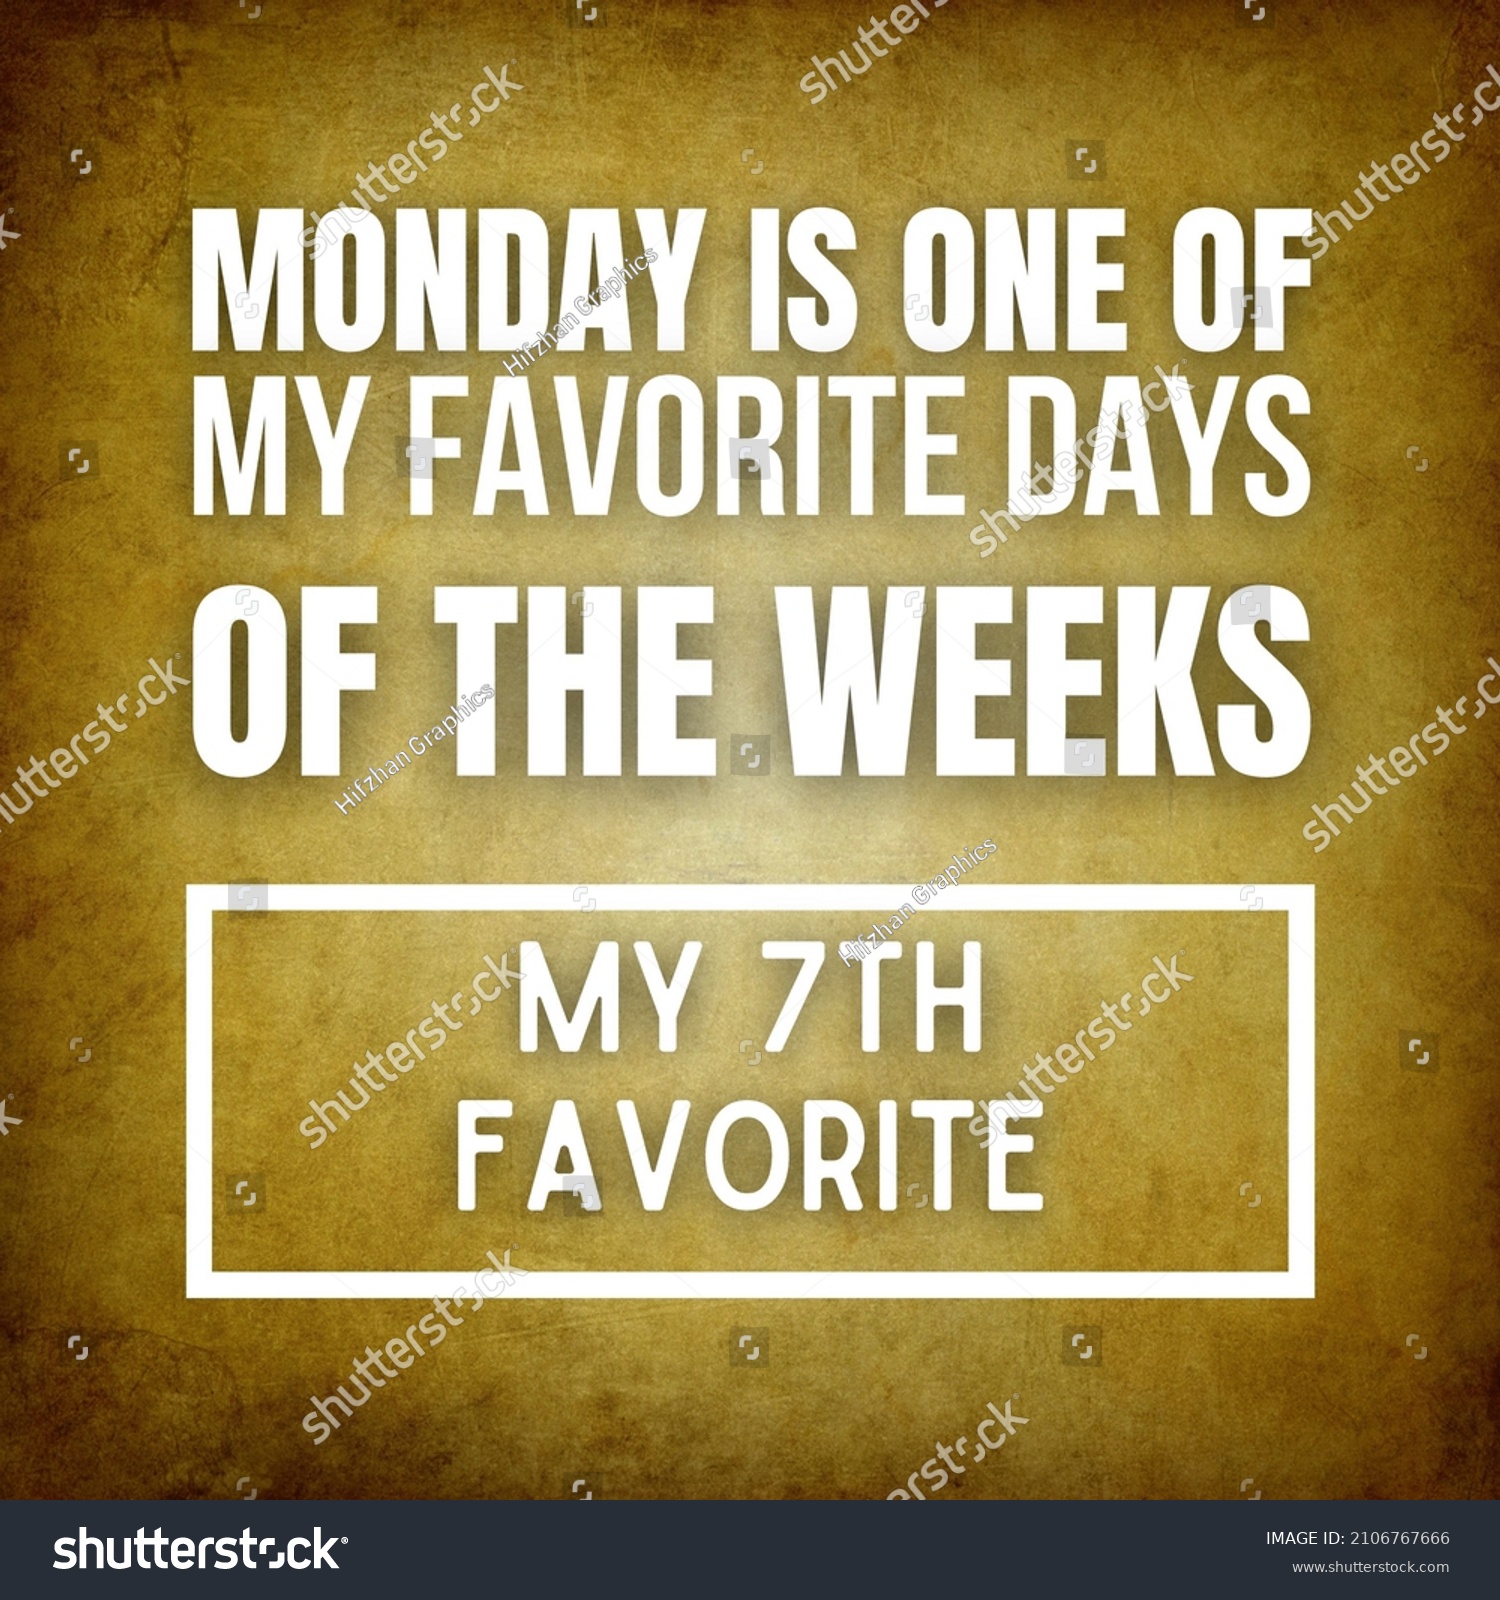 Funny Mondays Quotes Image Design, Fitting for Social Media Content Post, Blog, Poster, or Banner #2106767666